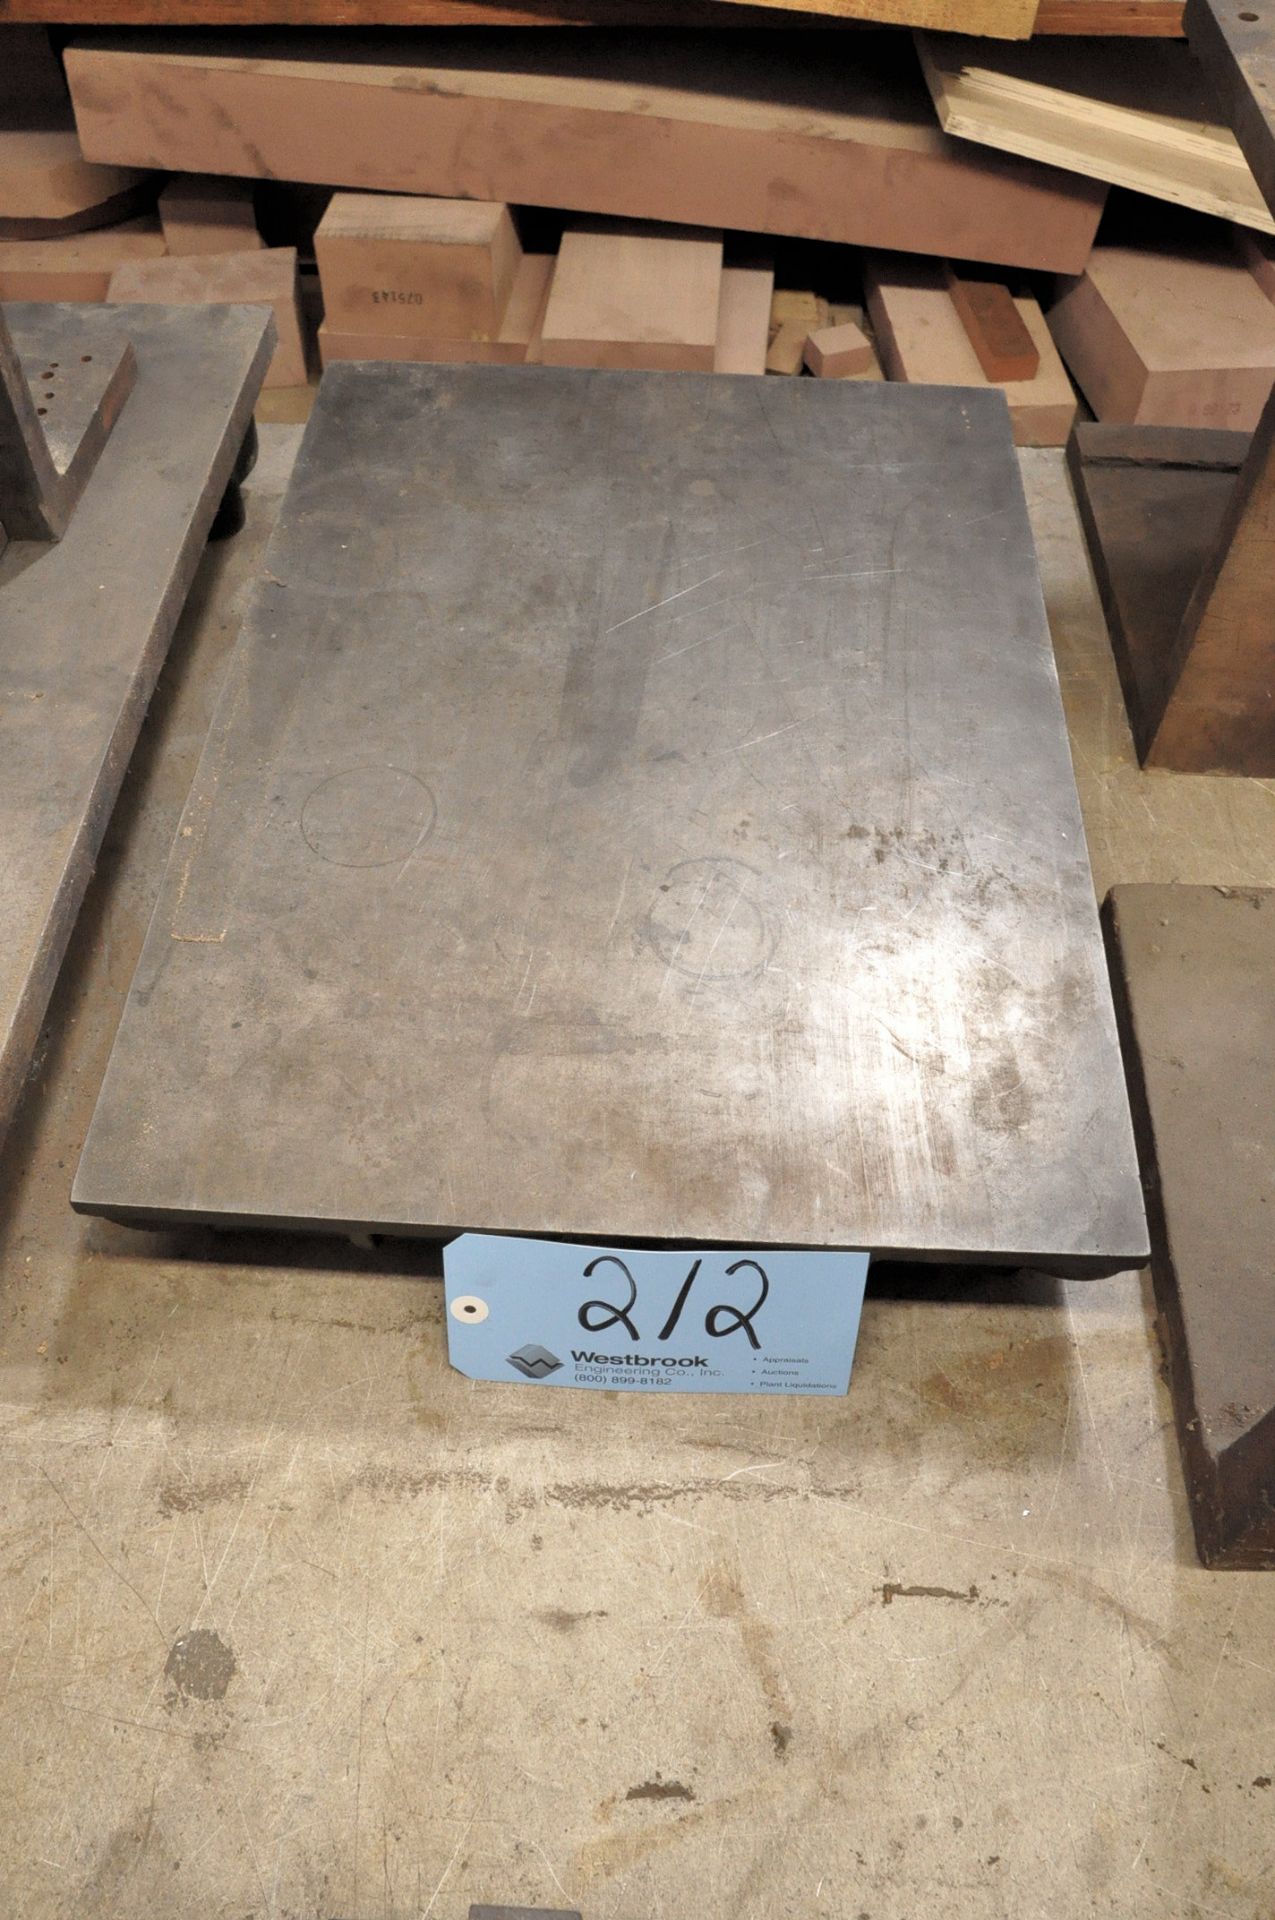 16"W x 22"L x 1/2" Thick Steel Surface Plate